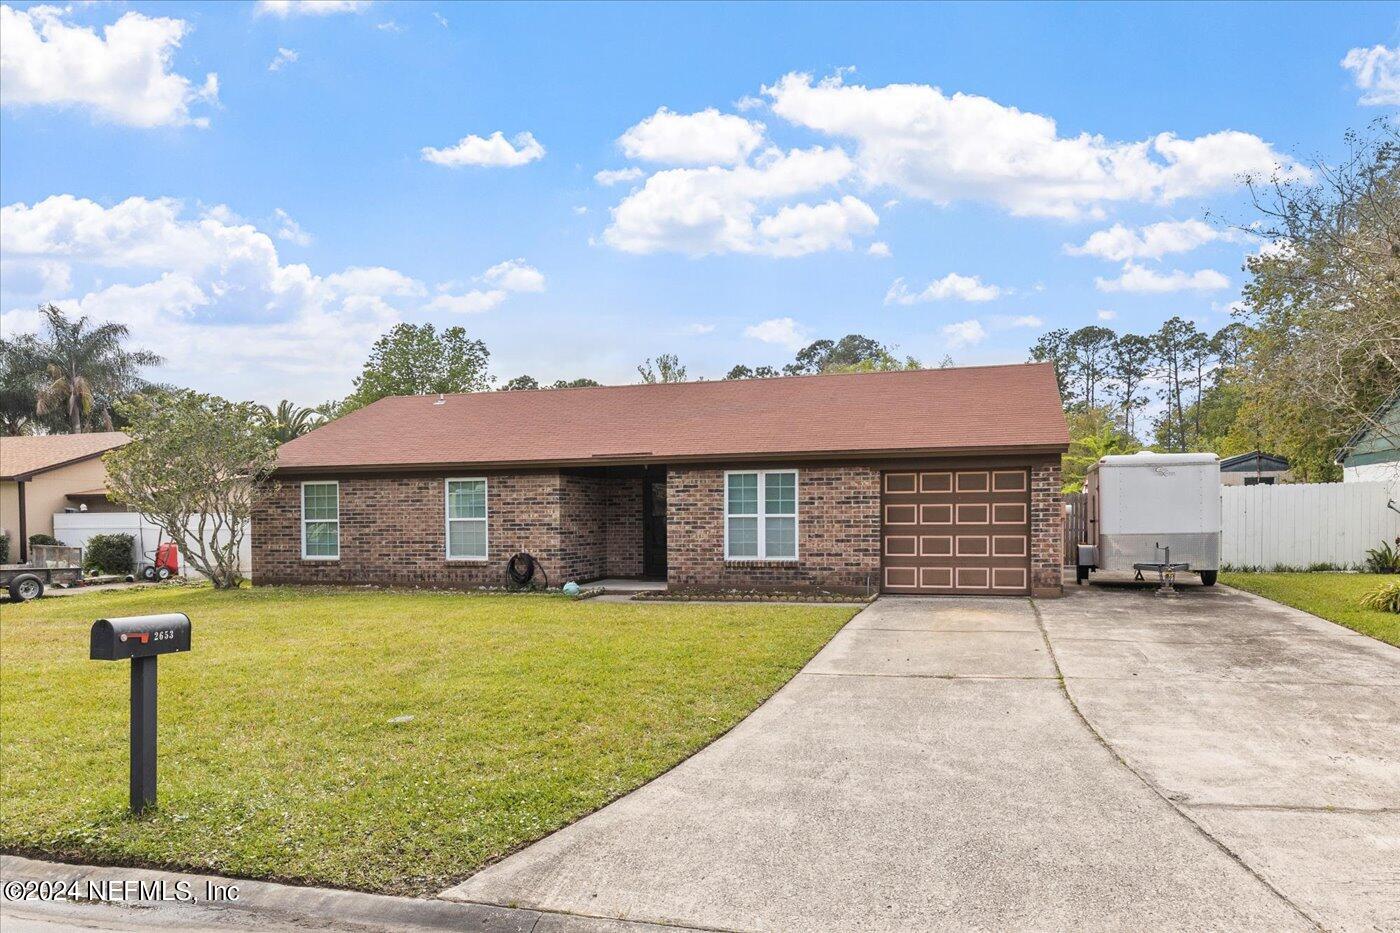 Middleburg, FL home for sale located at 2653 E PINEWOOD Boulevard, Middleburg, FL 32068